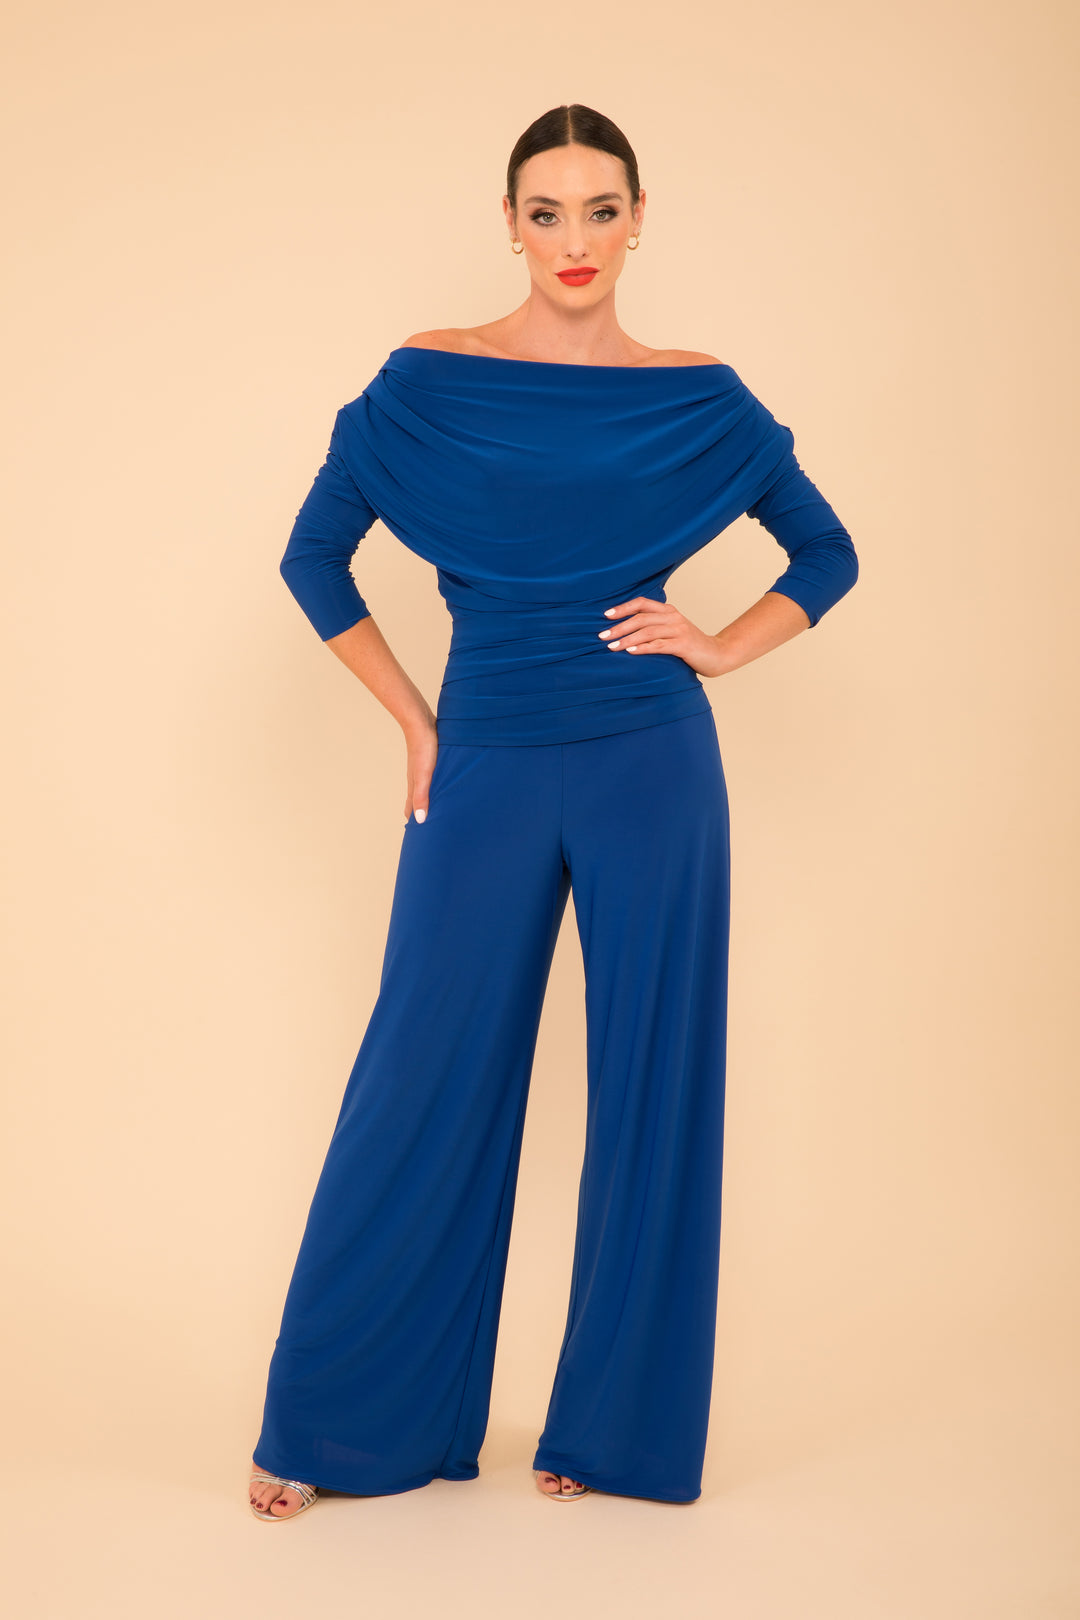 ATOM LABEL carbon jumpsuit with sleeve in cobalt